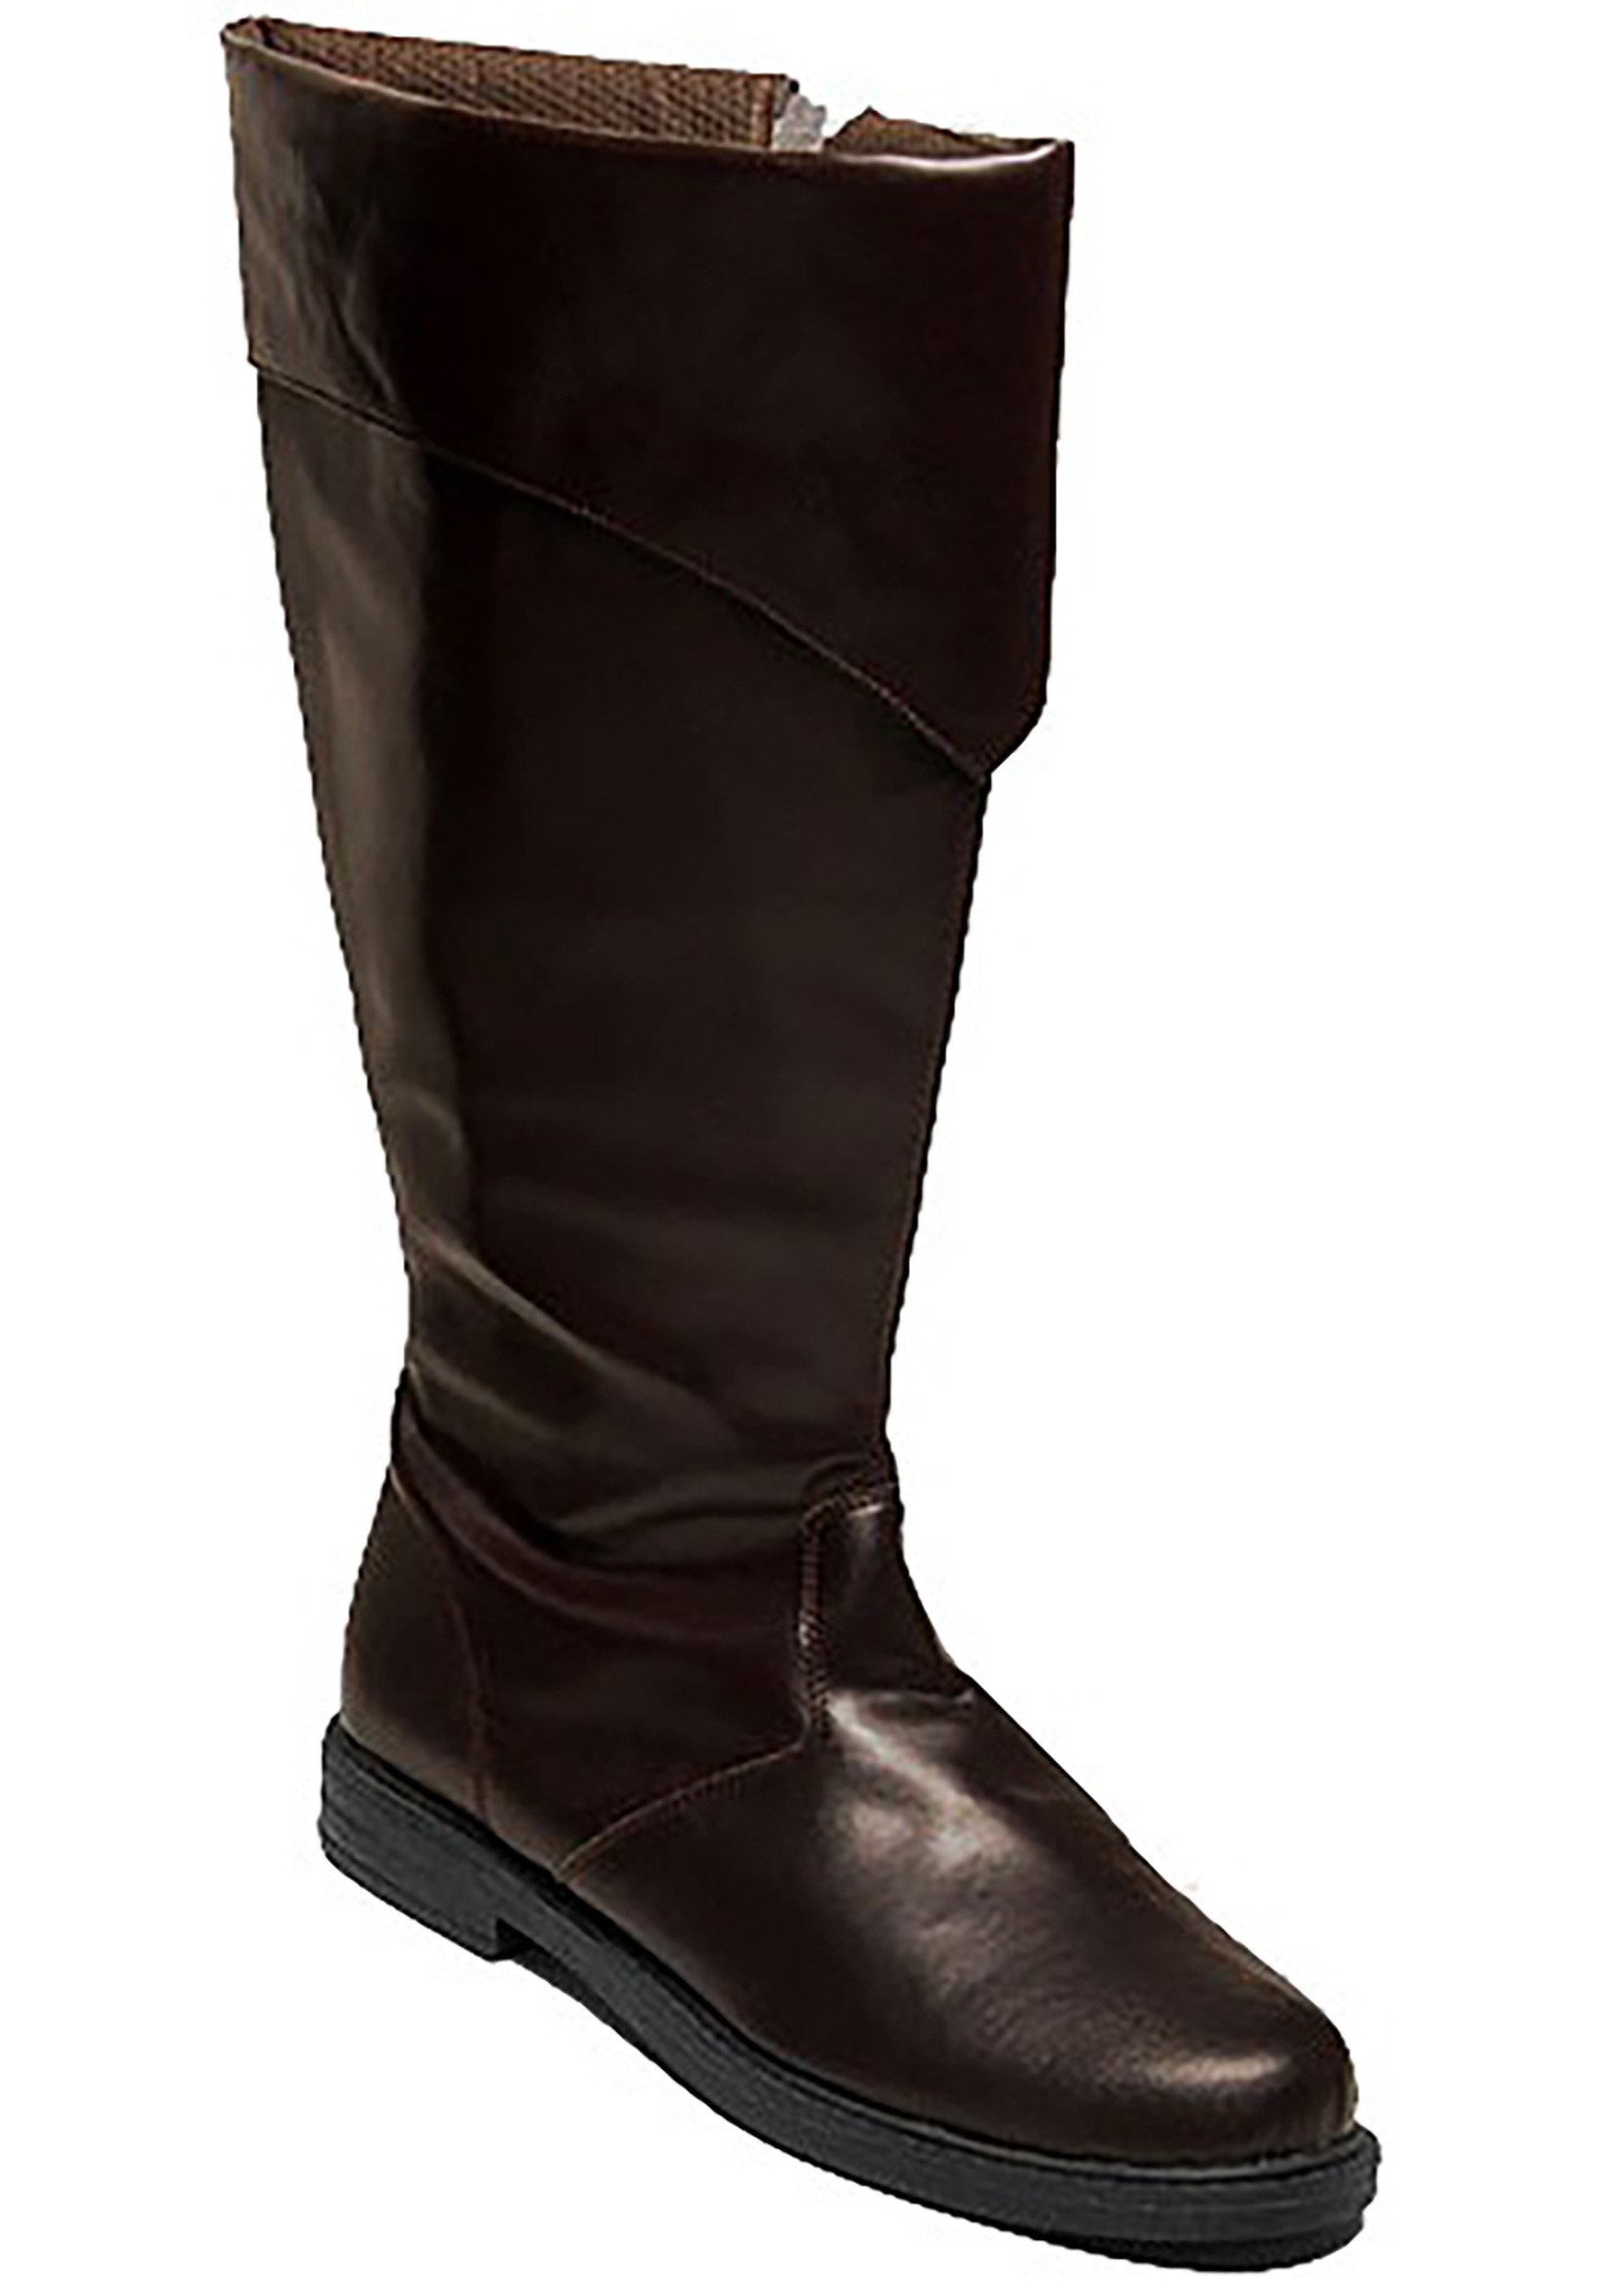 mens tall work boots